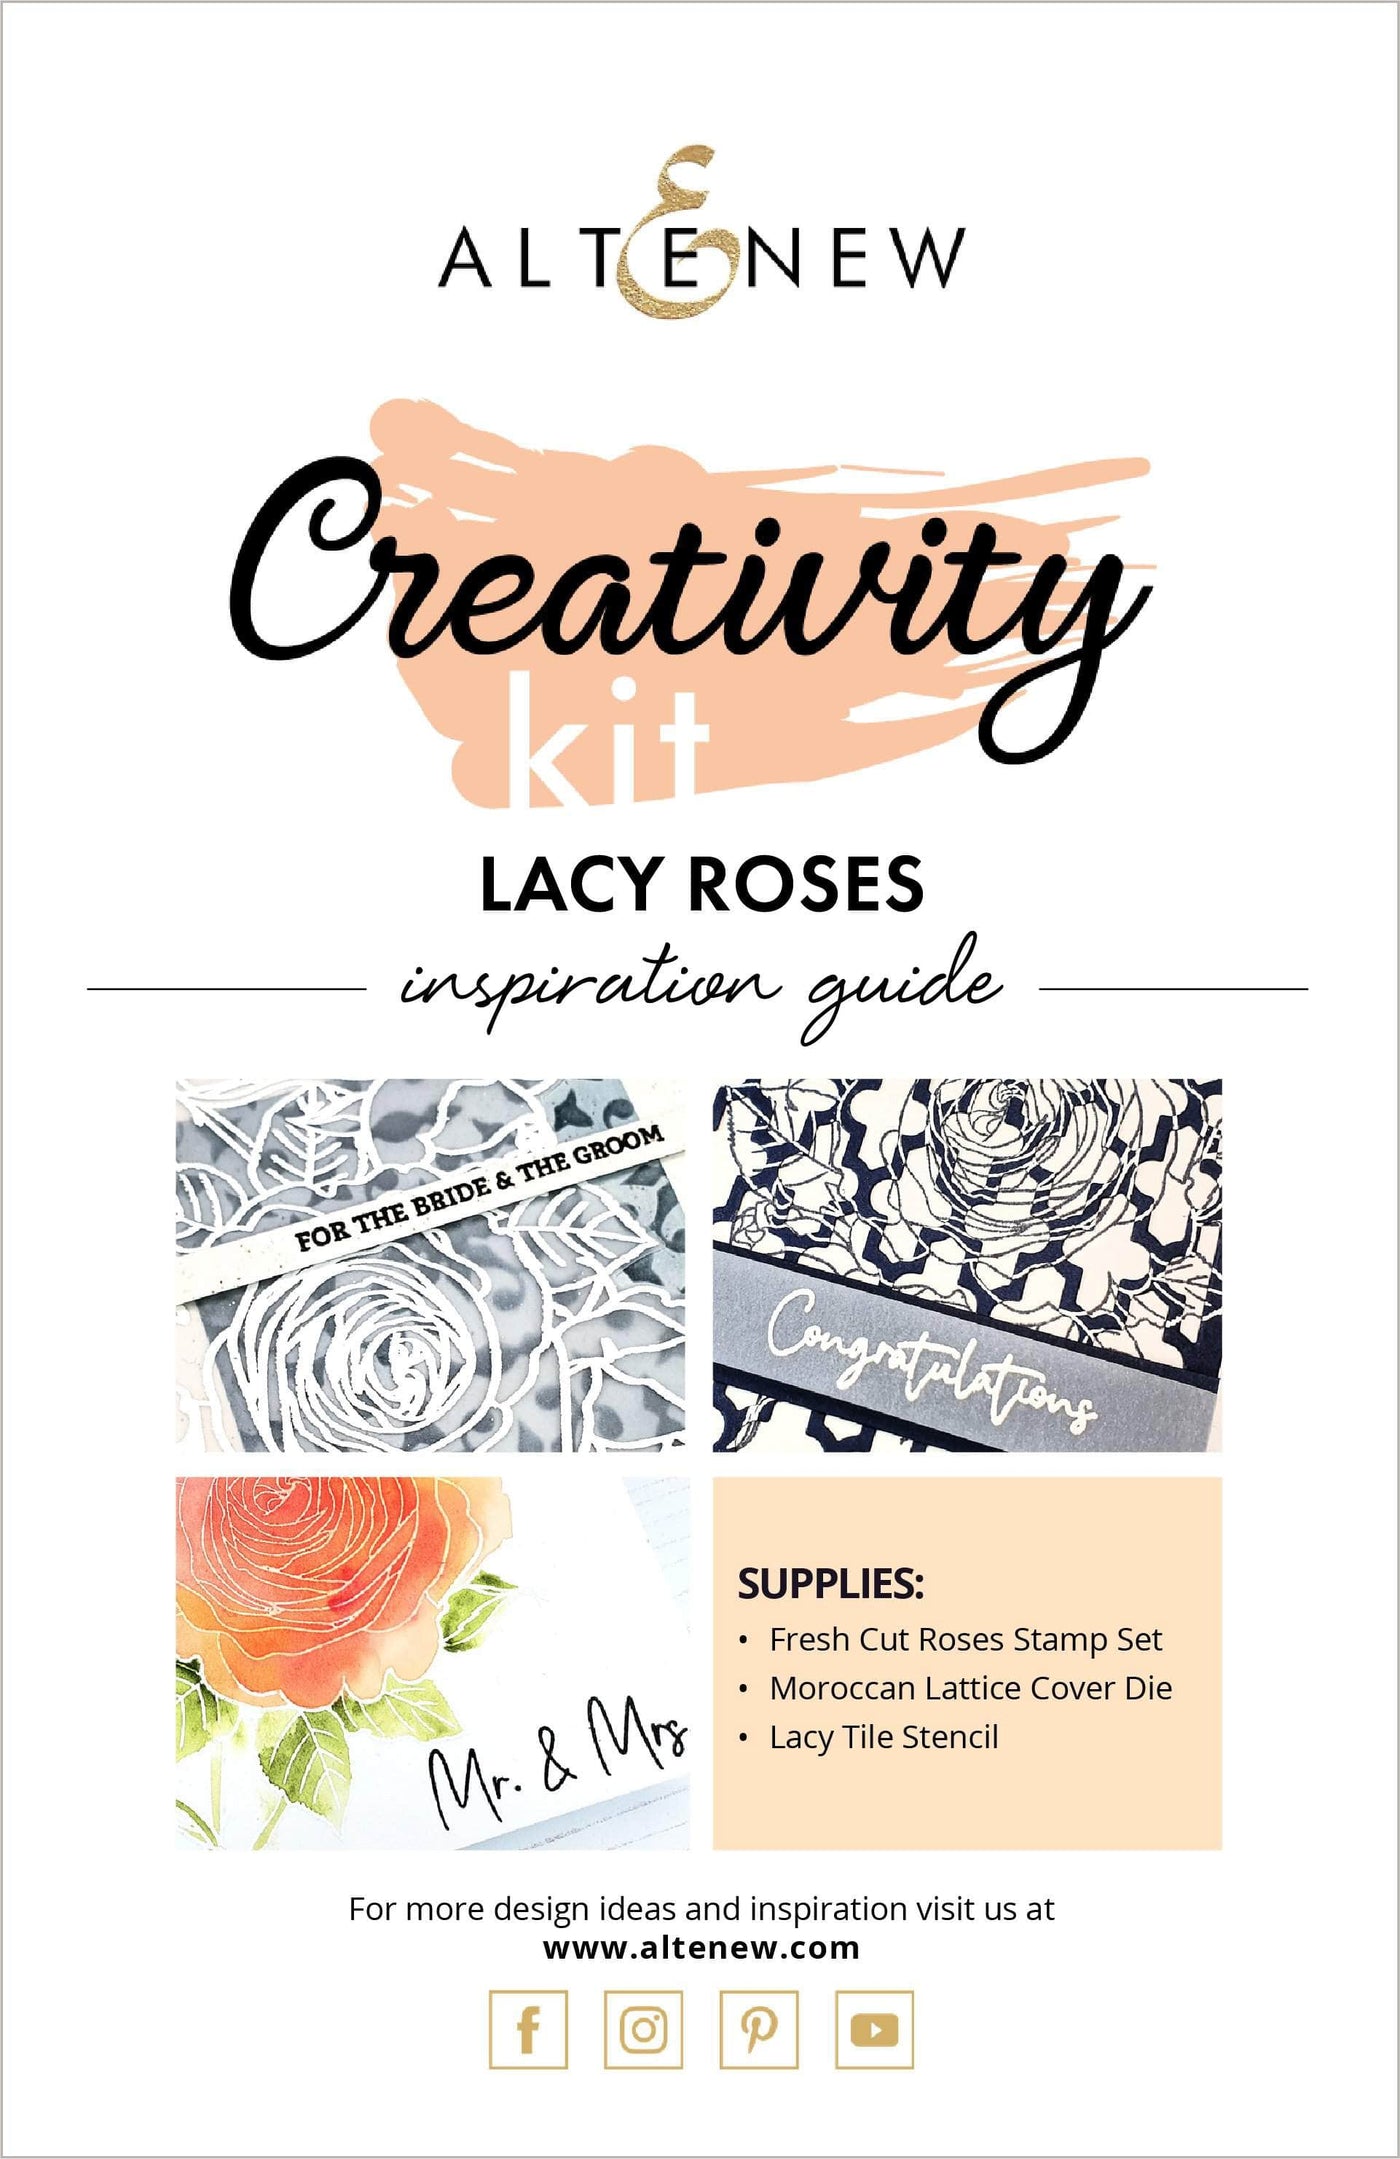 55Printing.com Printed Media Lacy Roses Creativity Cardmaking Kit Inspiration Guide